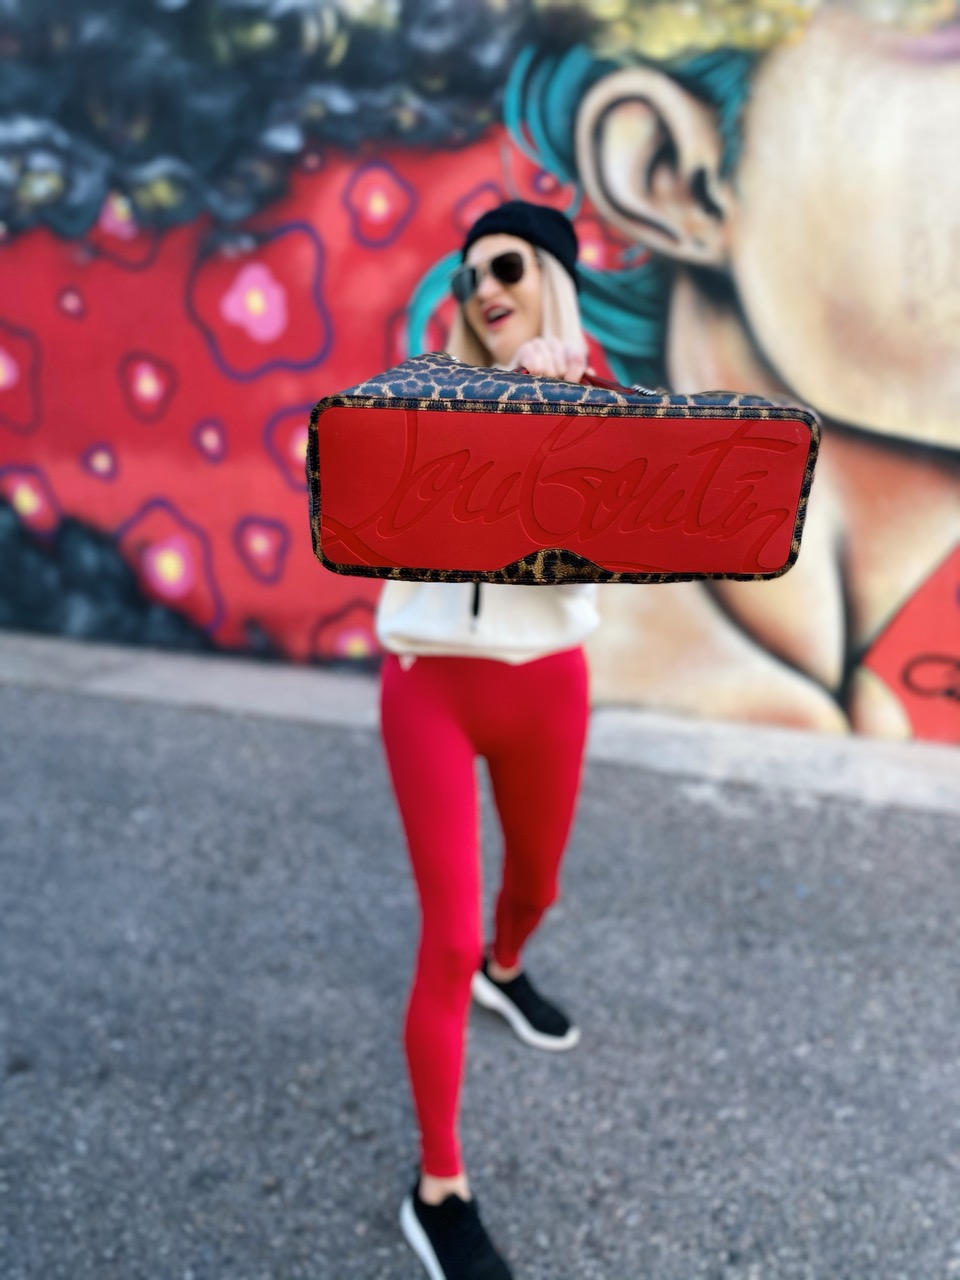 Lifestyle Influencer, Jamie Lewinger of More Than Turquoise, carrying Christian Louboutin animal print tote